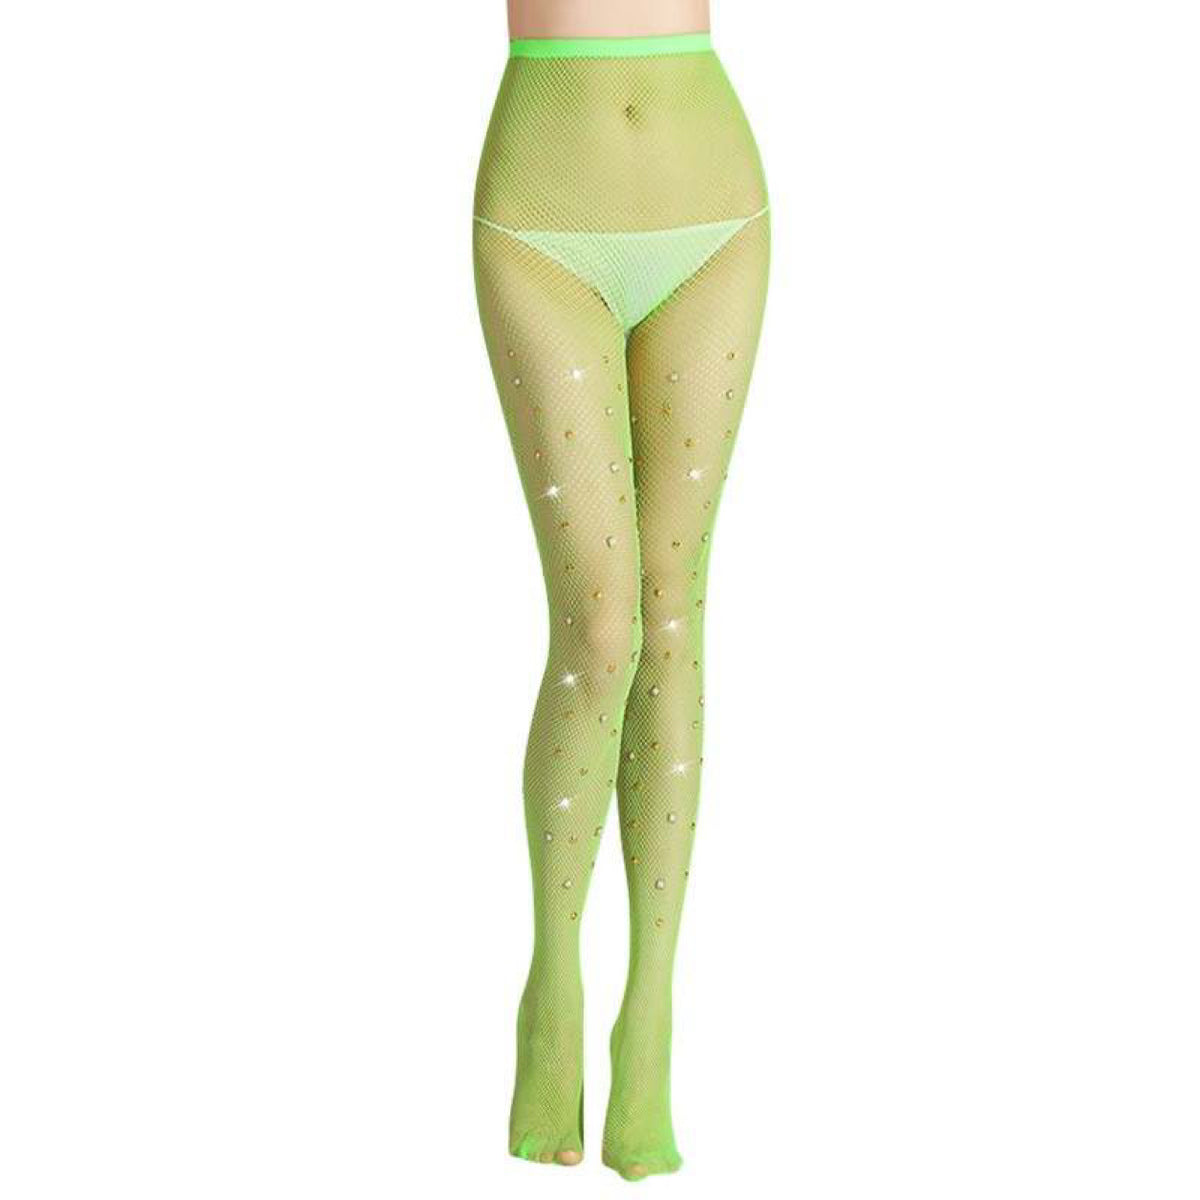 Large pearl & gold stones Fishnet Stockings - Lime Green Neon